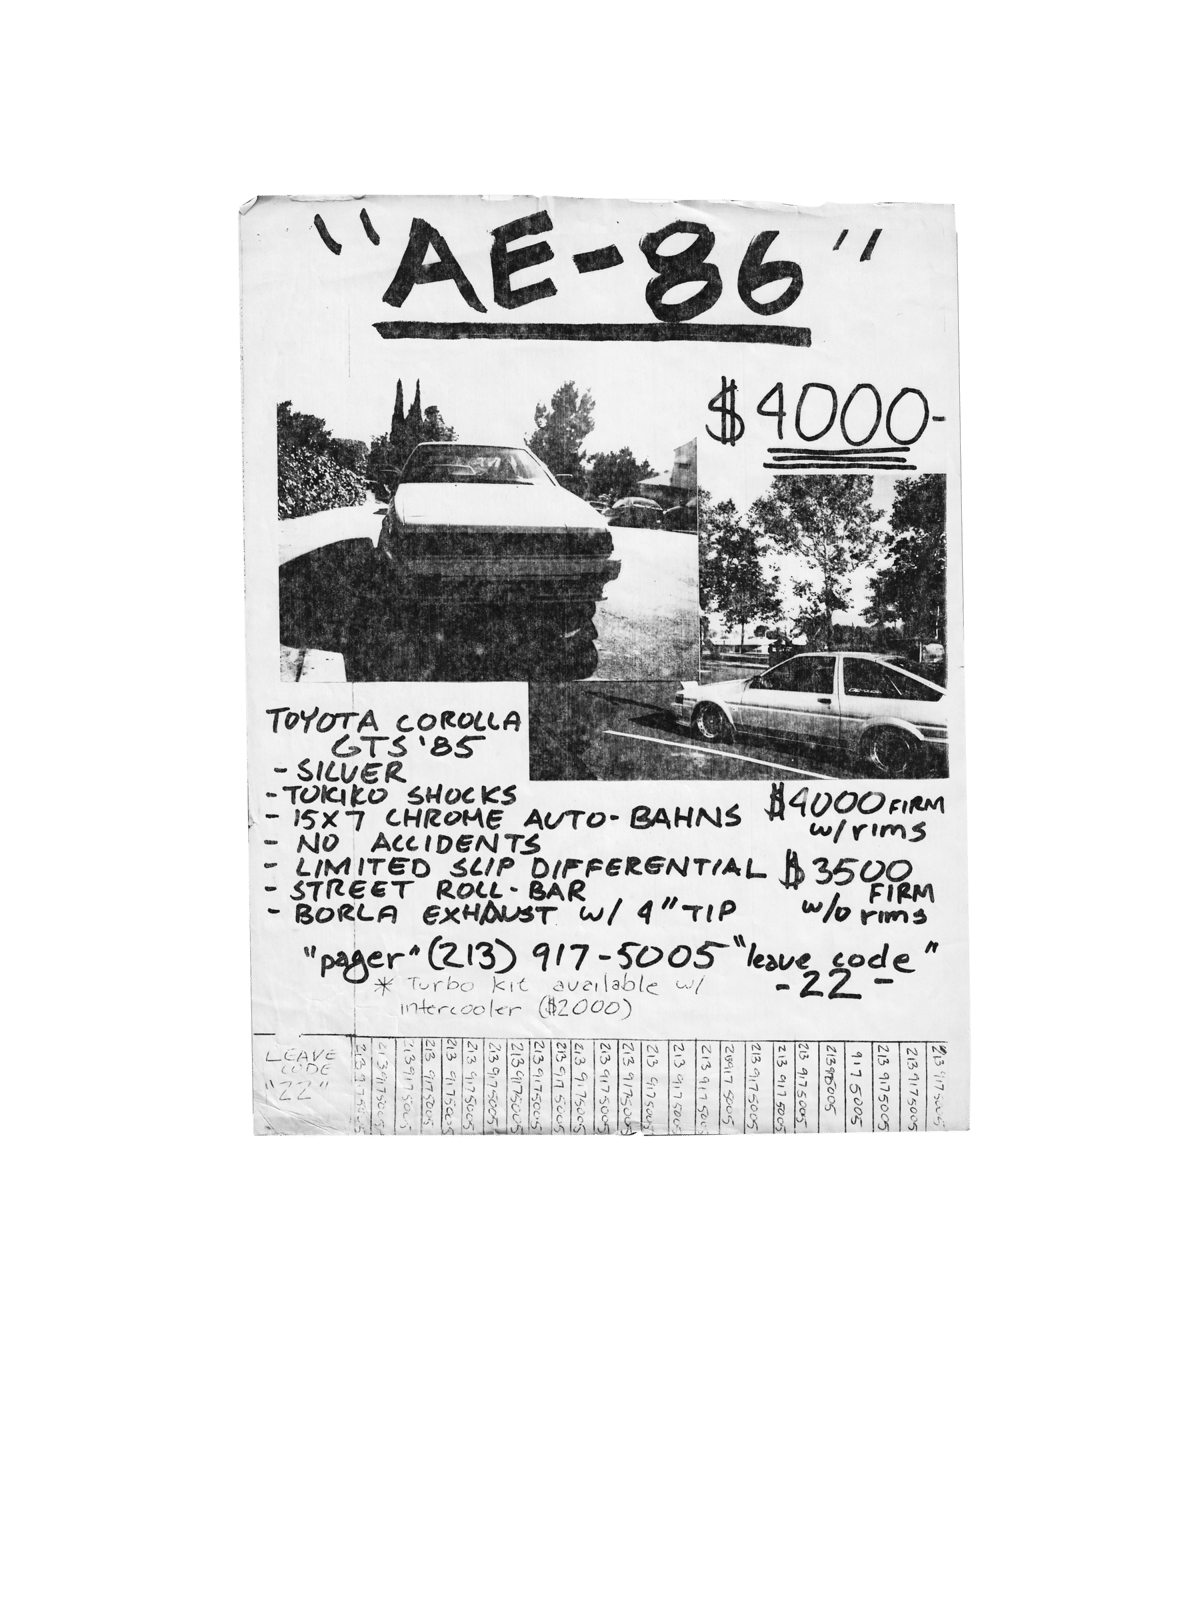 Image of AE86 FOR SALE in 1994 T Shirt